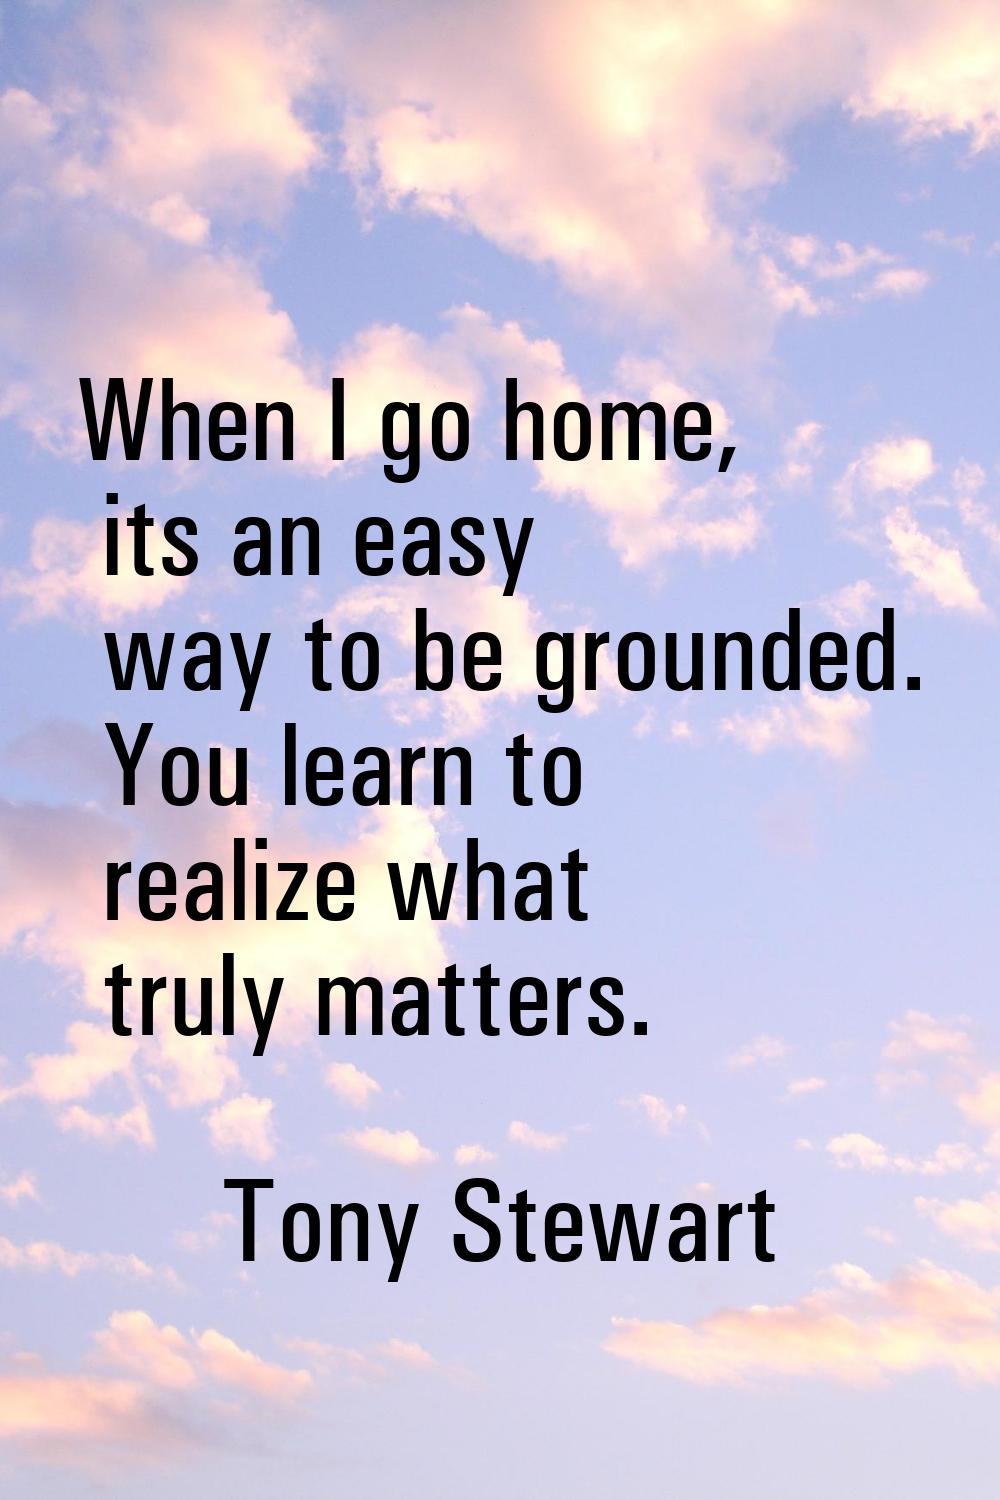 When I go home, its an easy way to be grounded. You learn to realize what truly matters.